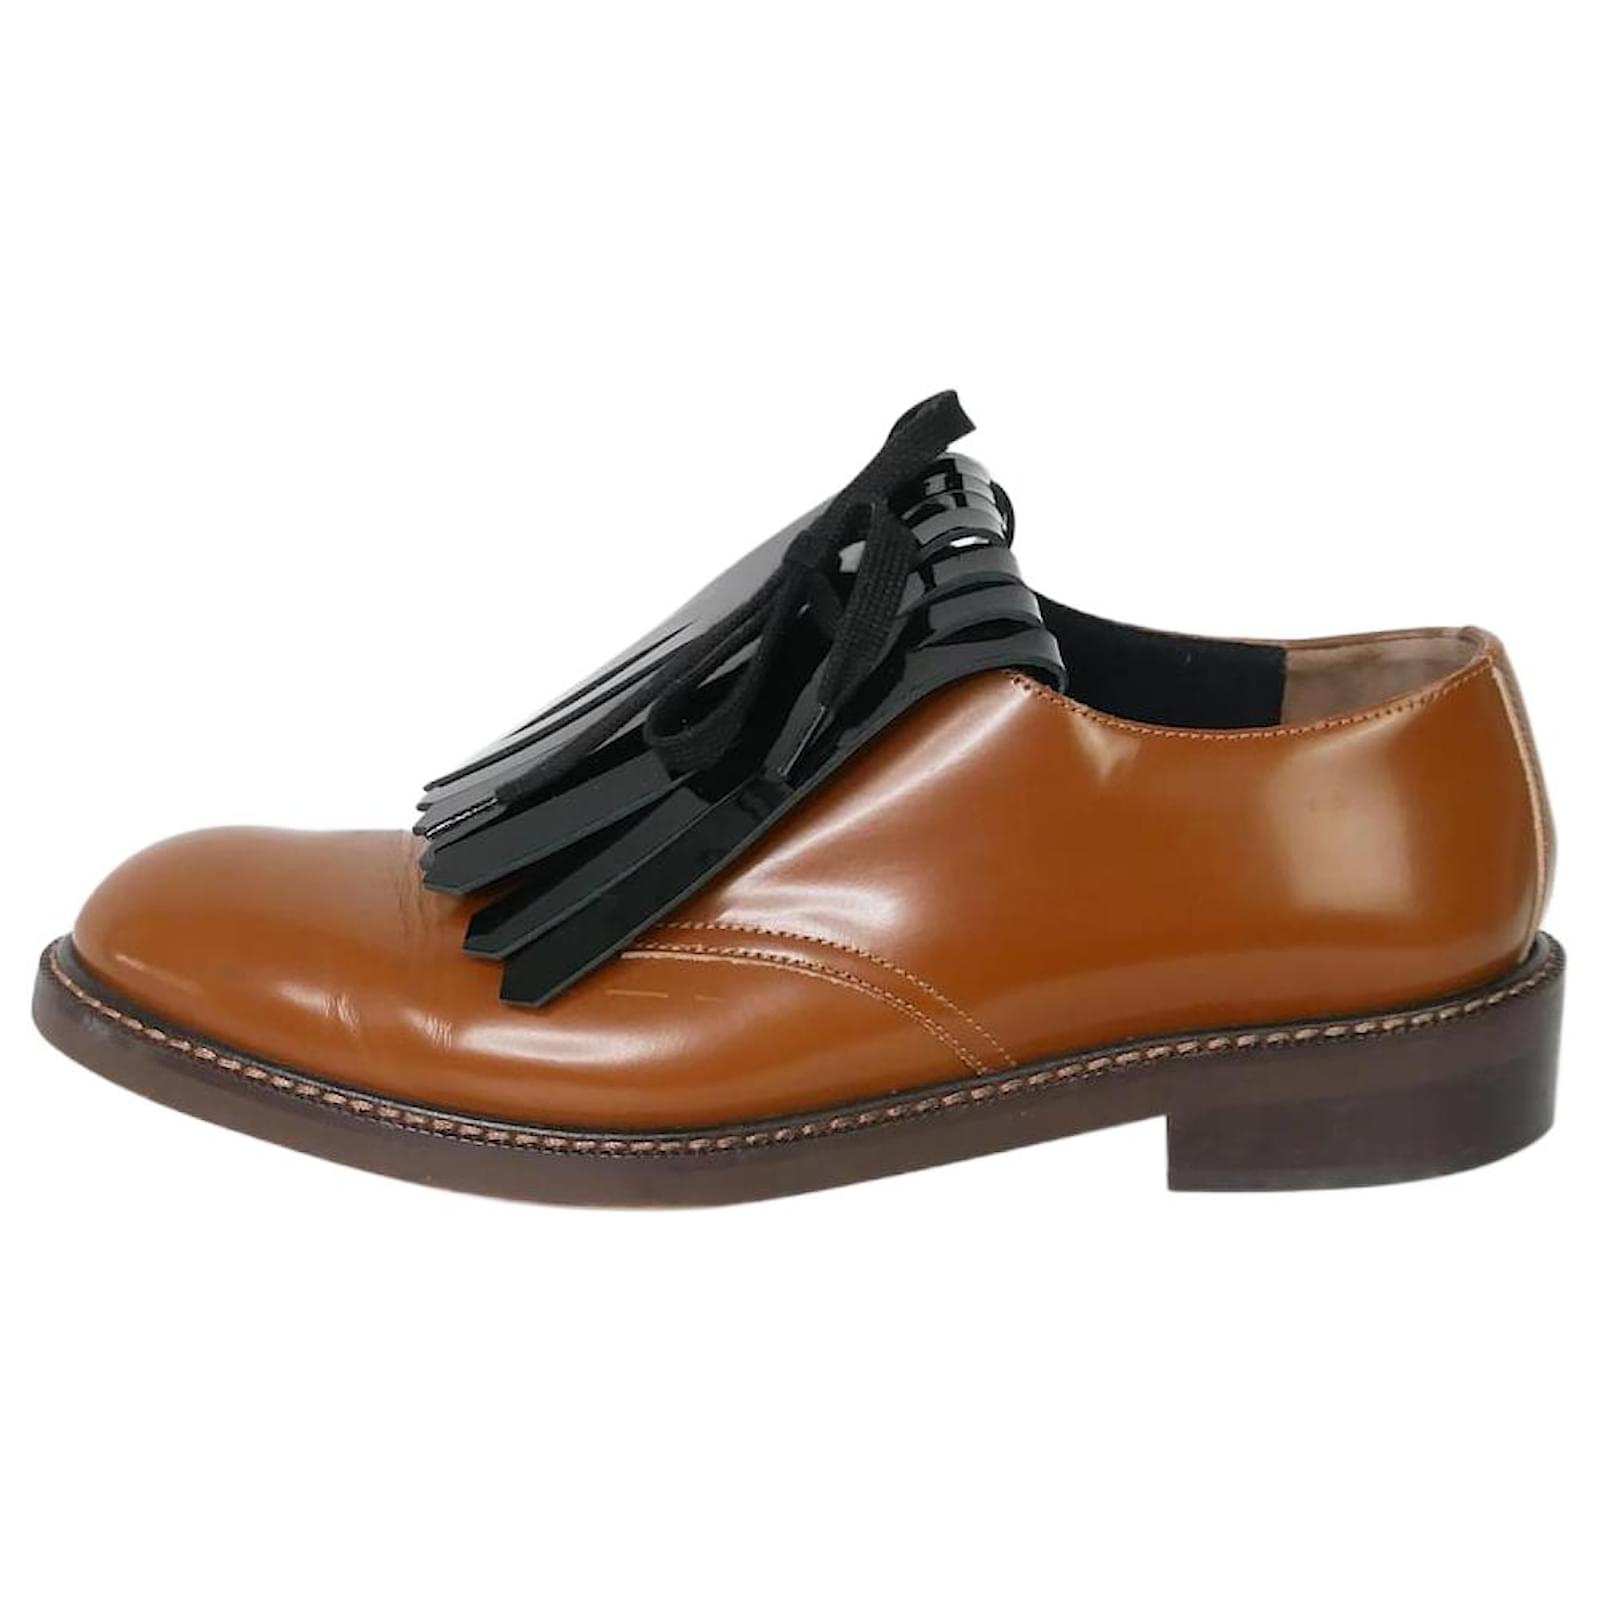 Brown fringed shoes - size EU 40